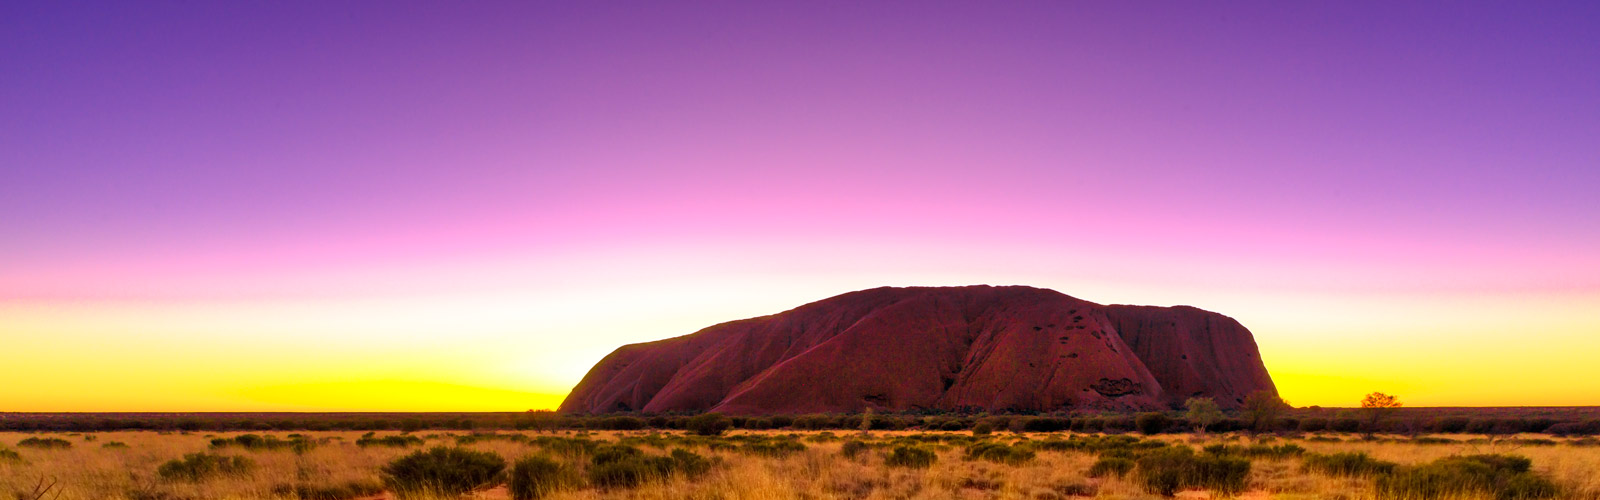 What is Ayers Rock?